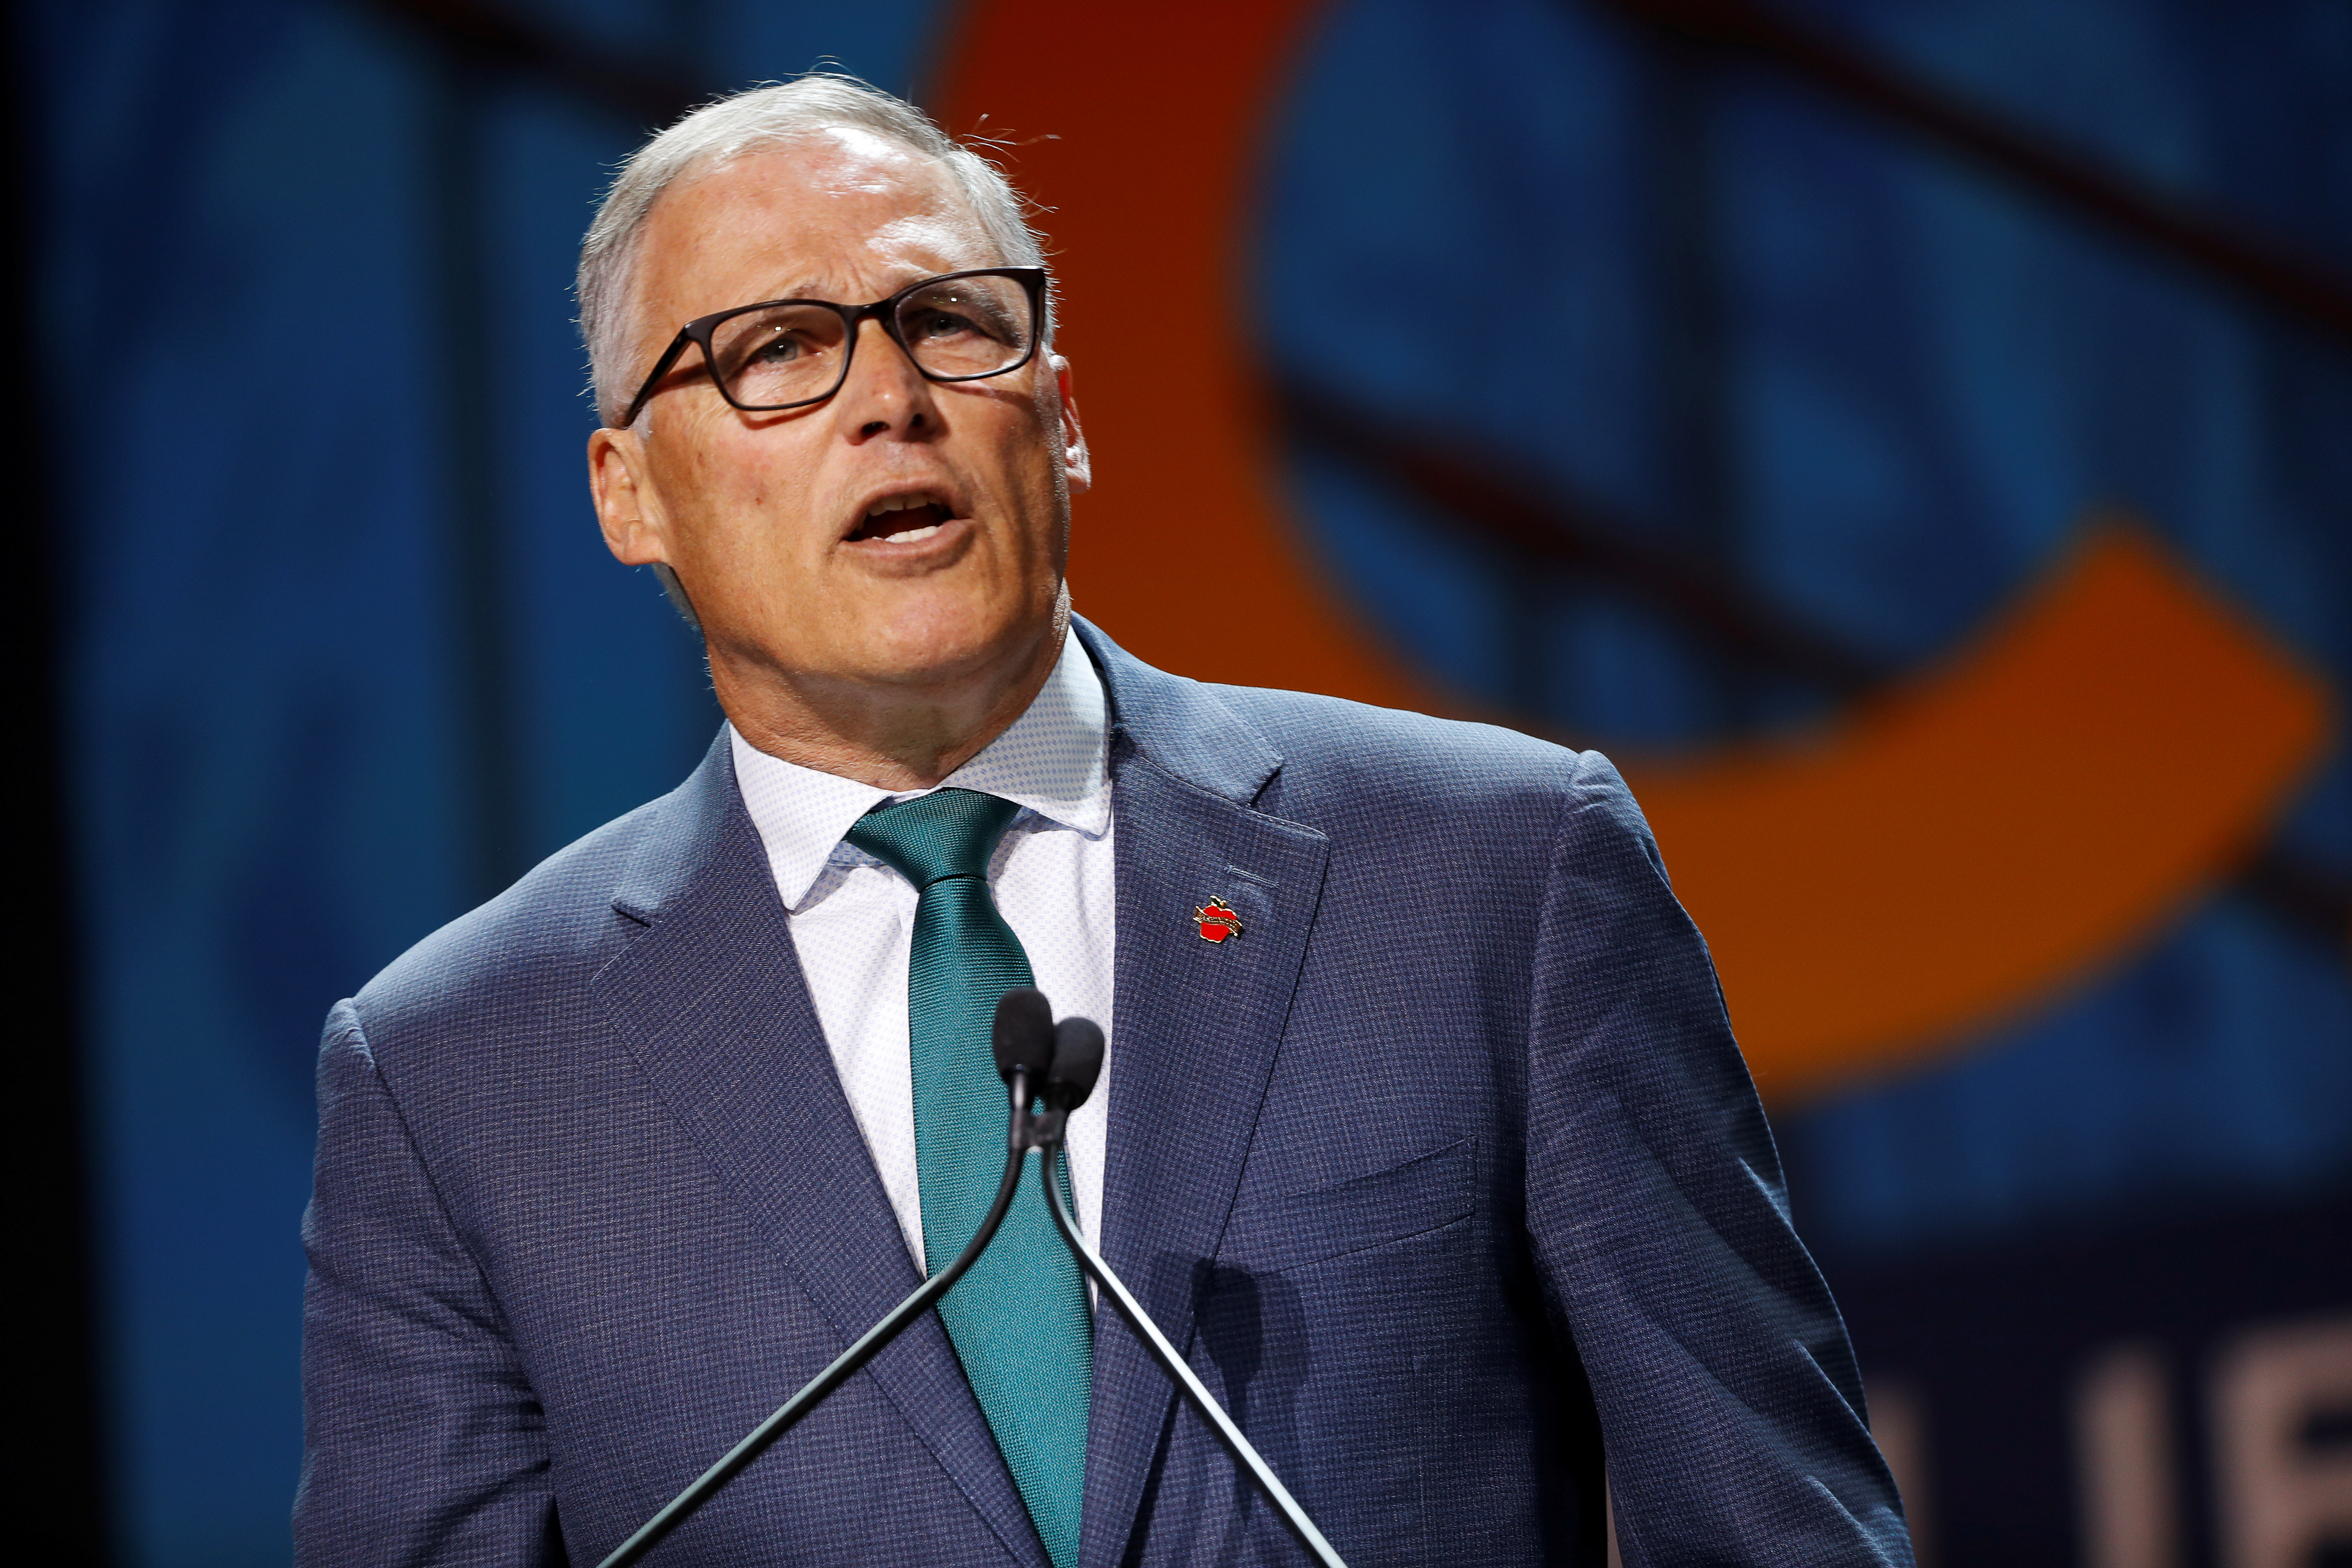 Democratic presidential candidate and Washington State Governor Jay Inslee speaks during the California Democratic Convention in San Francisco, California